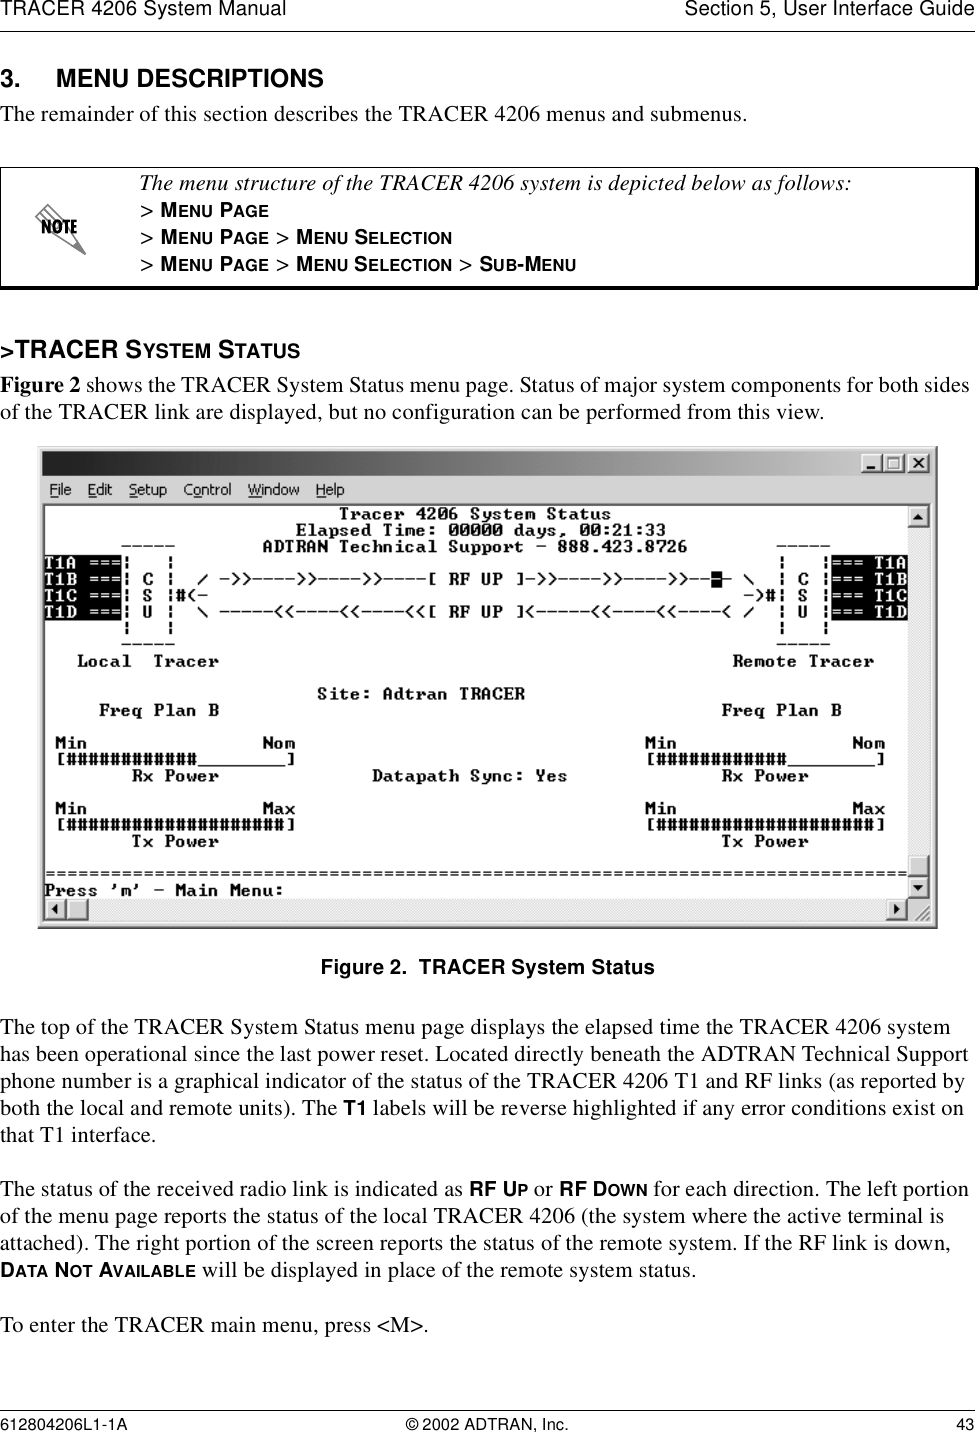 TRACER 4206 System Manual Section 5, User Interface Guide612804206L1-1A © 2002 ADTRAN, Inc. 433. MENU DESCRIPTIONSThe remainder of this section describes the TRACER 4206 menus and submenus. &gt;TRACER SYSTEM STATUSFigure 2 shows the TRACER System Status menu page. Status of major system components for both sides of the TRACER link are displayed, but no configuration can be performed from this view.Figure 2.  TRACER System StatusThe top of the TRACER System Status menu page displays the elapsed time the TRACER 4206 system has been operational since the last power reset. Located directly beneath the ADTRAN Technical Support phone number is a graphical indicator of the status of the TRACER 4206 T1 and RF links (as reported by both the local and remote units). The T1 labels will be reverse highlighted if any error conditions exist on that T1 interface.The status of the received radio link is indicated as RF UP or RF DOWN for each direction. The left portion of the menu page reports the status of the local TRACER 4206 (the system where the active terminal is attached). The right portion of the screen reports the status of the remote system. If the RF link is down, DATA NOT AVAILABLE will be displayed in place of the remote system status. To enter the TRACER main menu, press &lt;M&gt;.The menu structure of the TRACER 4206 system is depicted below as follows:&gt; MENU PAGE&gt; MENU PAGE &gt; MENU SELECTION&gt; MENU PAGE &gt; MENU SELECTION &gt; SUB-MENU